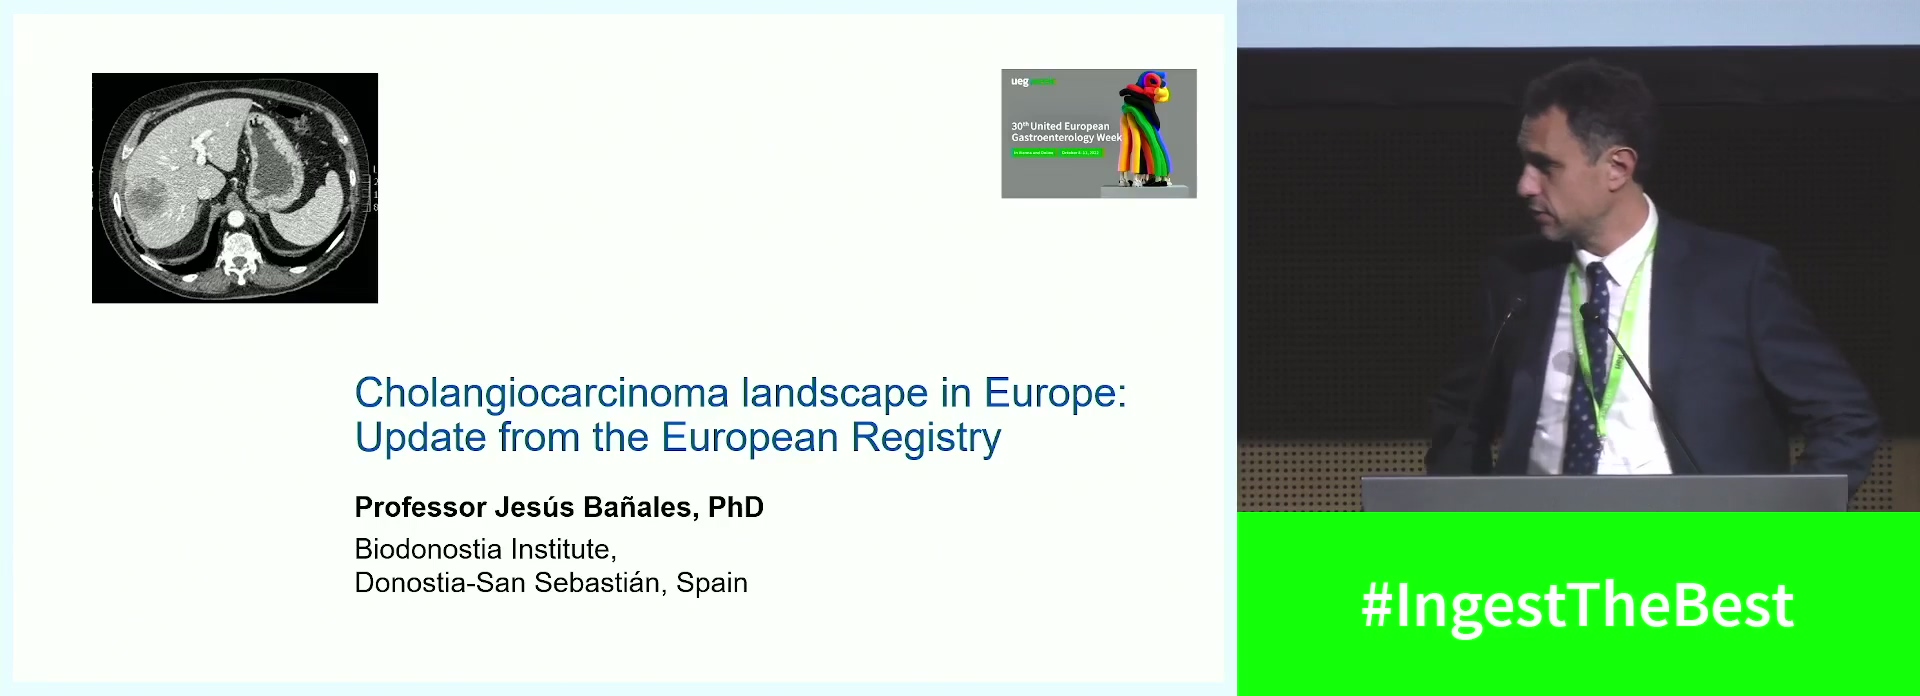 Cholangiocarcinoma landscape in Europe: Updates from the European Registry